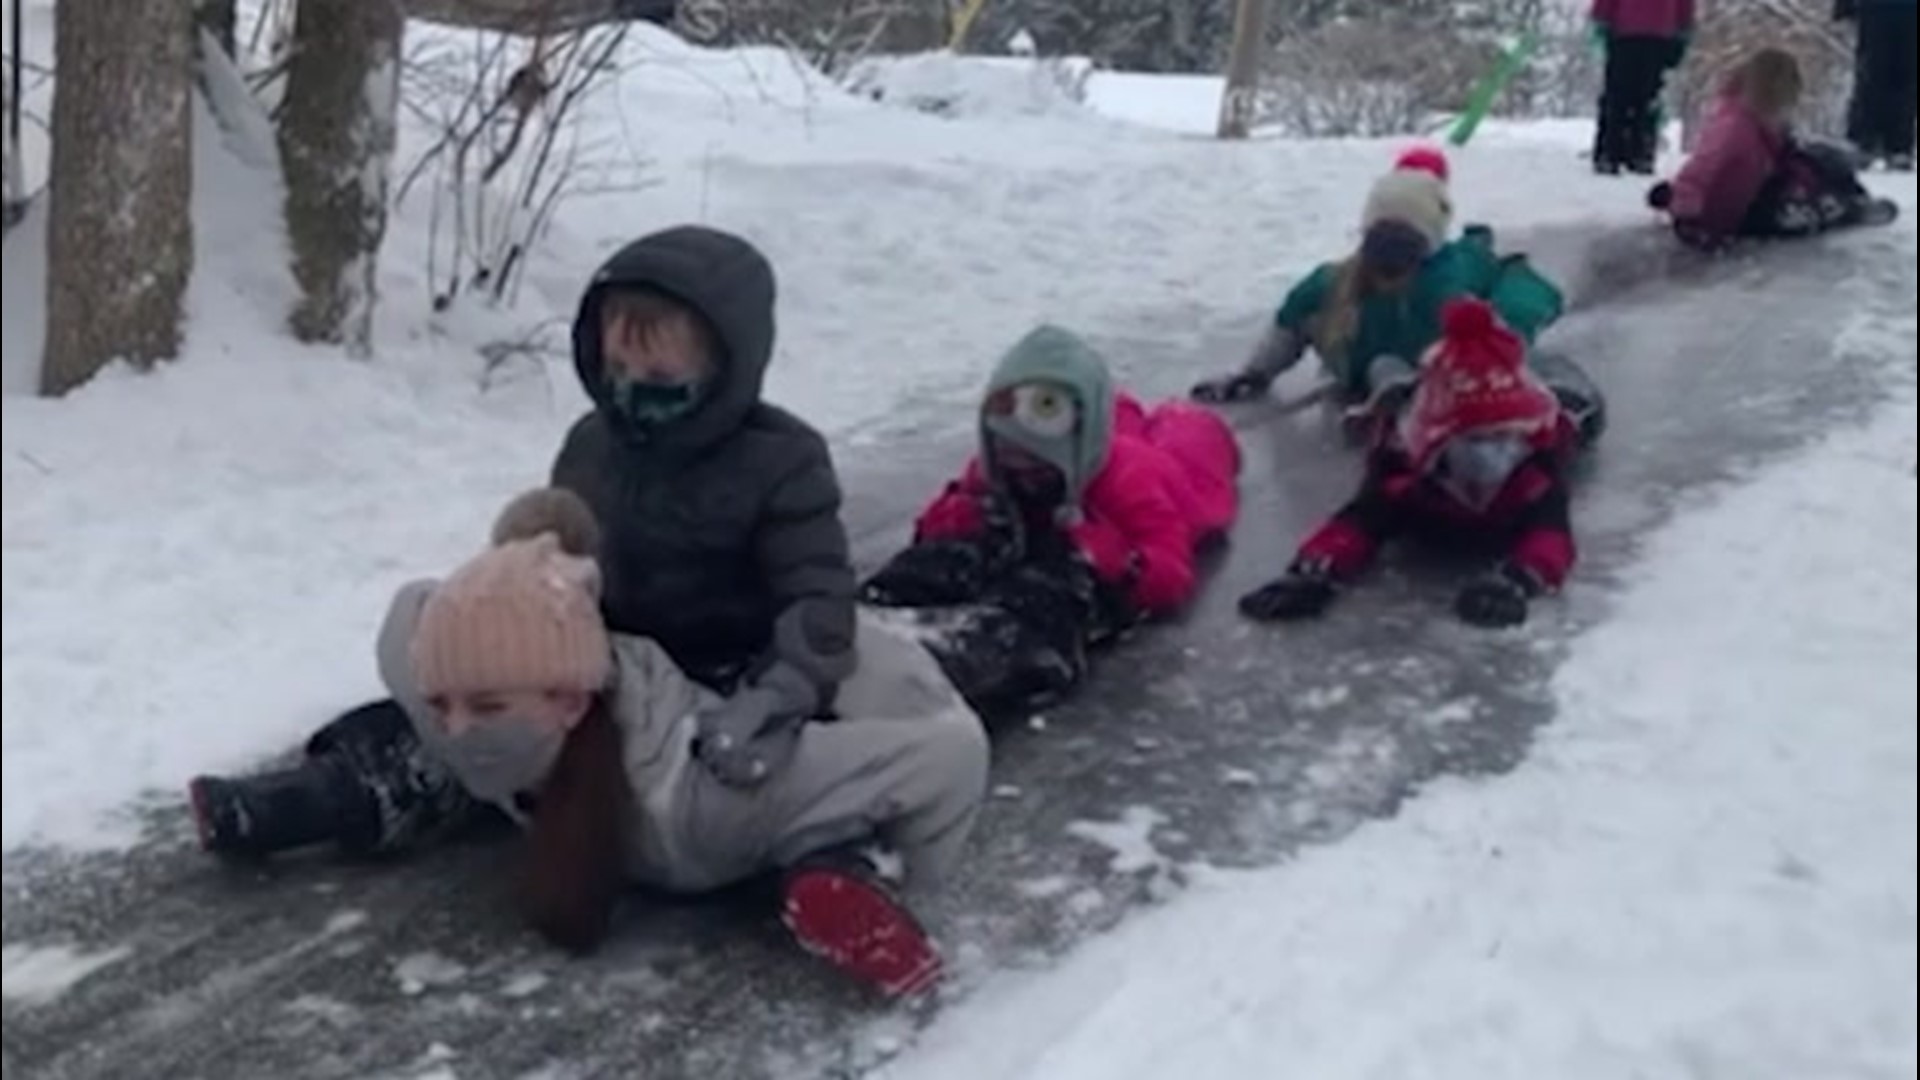 A group of children celebrated their snow day with a fun time sliding down an icy hill in State College, Pennsylvania, on Feb. 1.